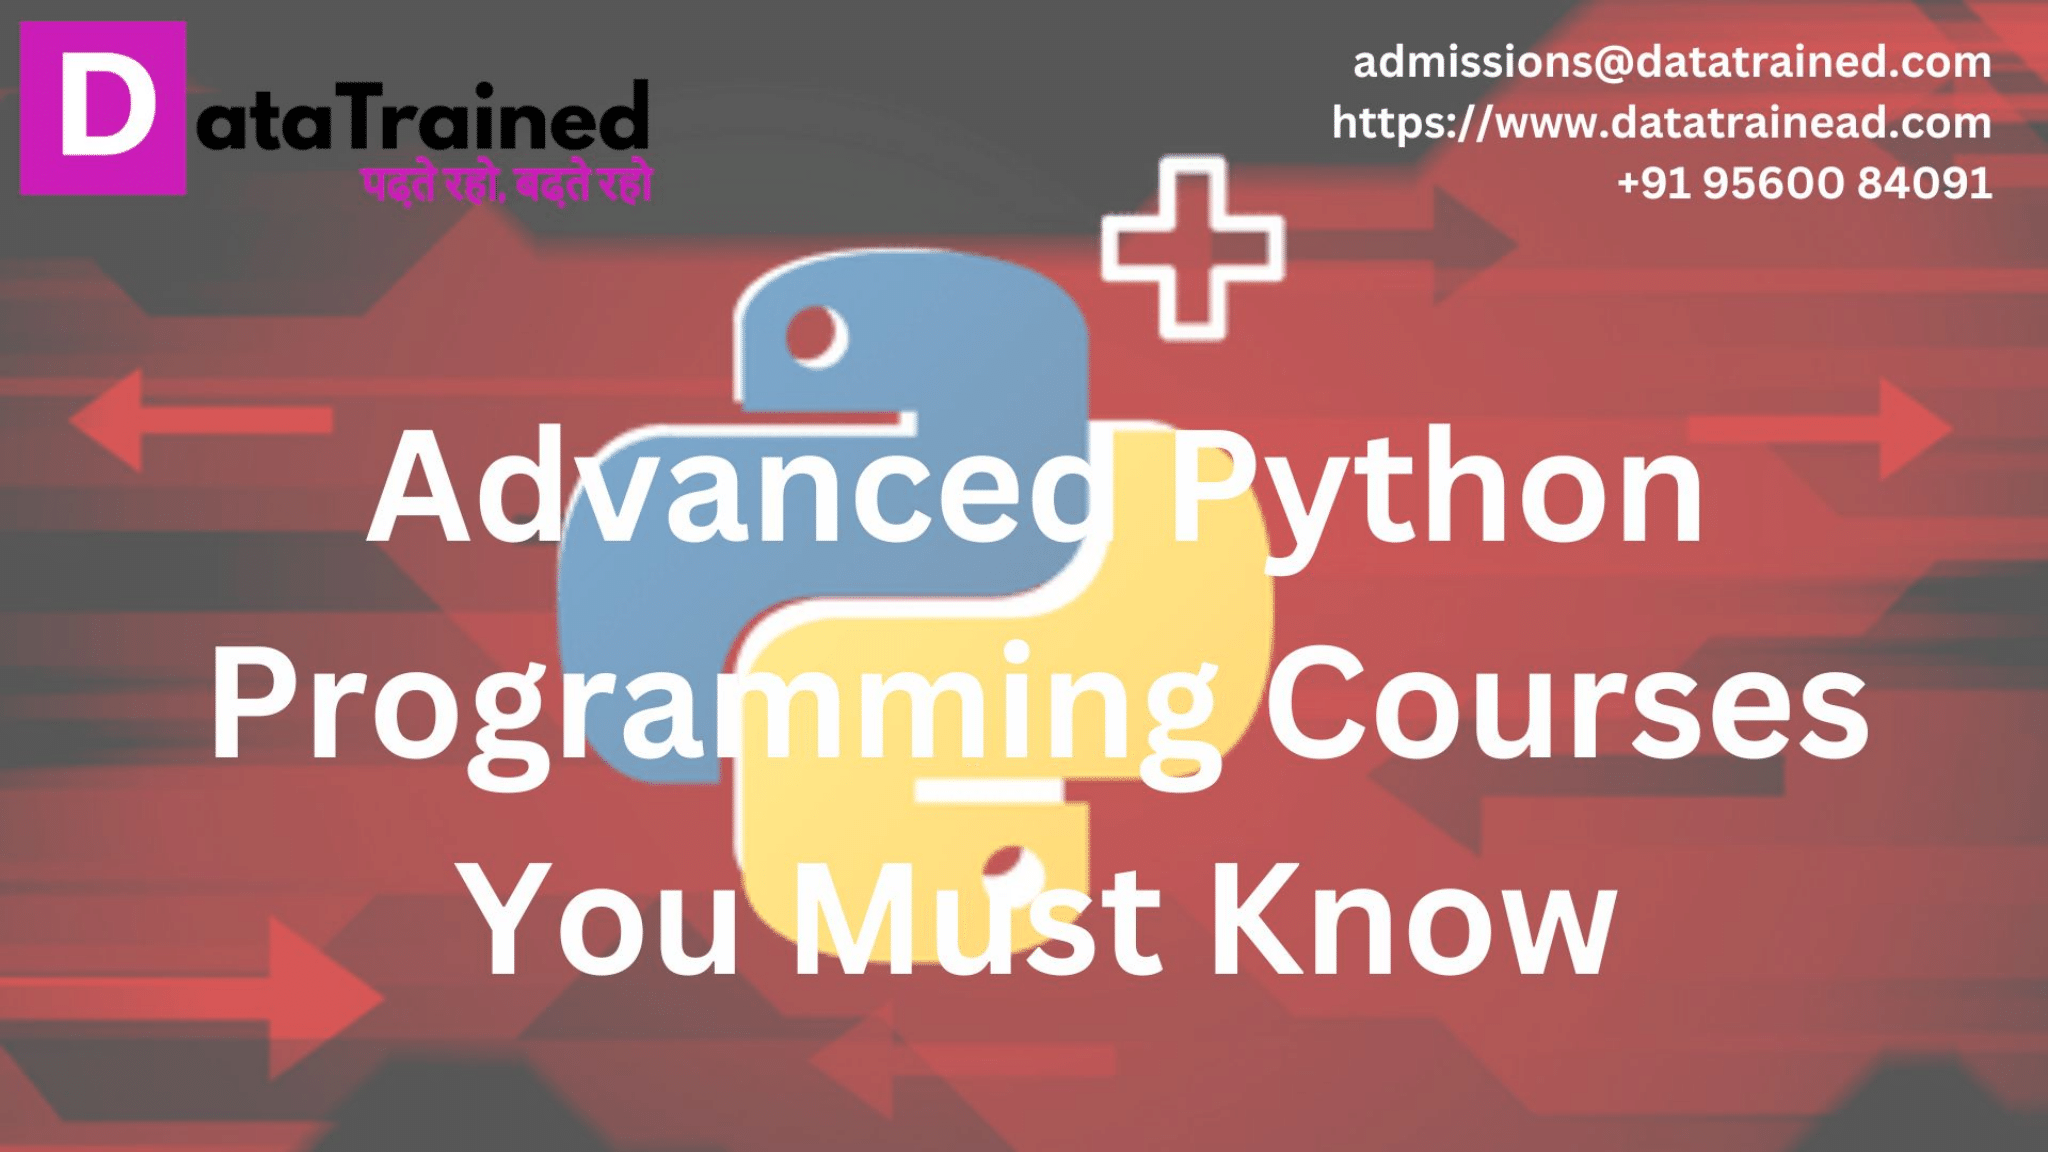 Dropbox - Advanced Python Programming Courses You must know (1).pdf - Simplify your life